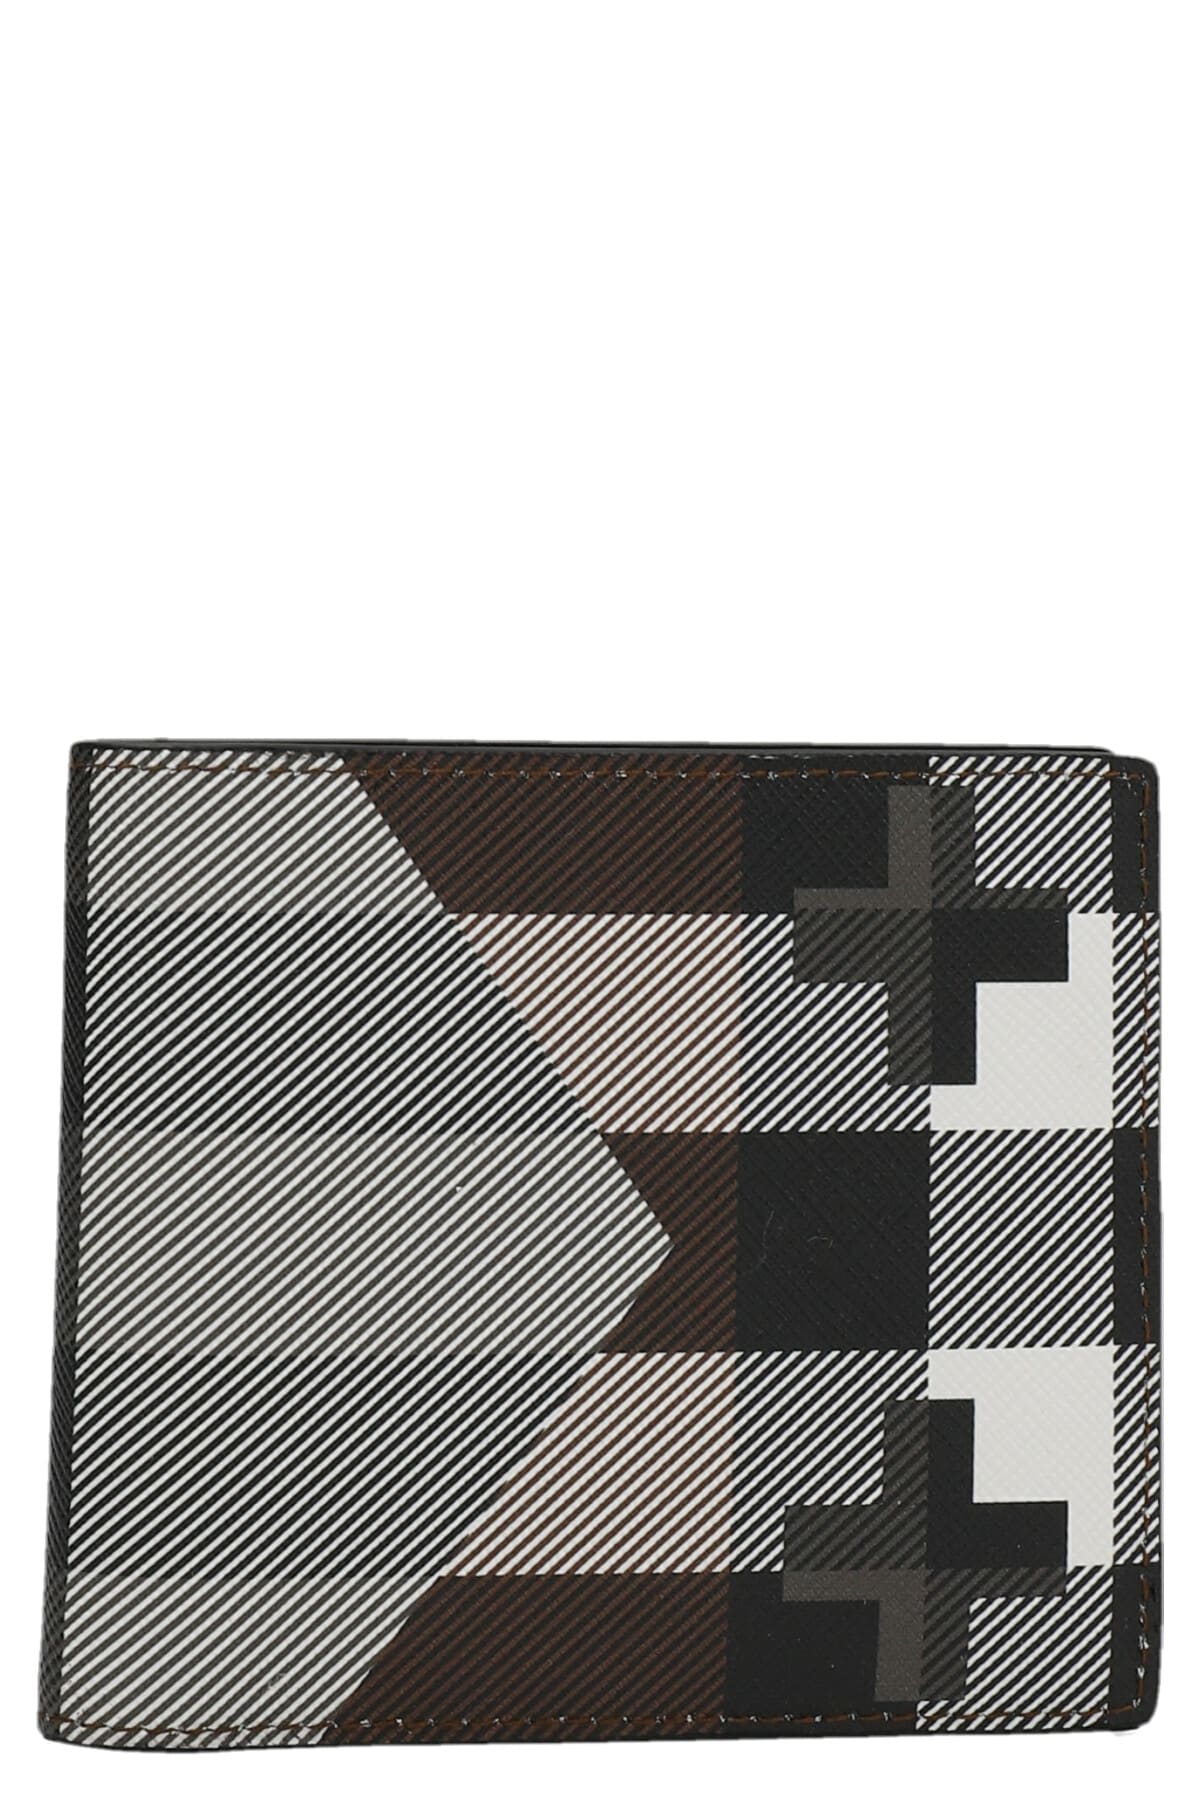 Burberry Printed Wallet